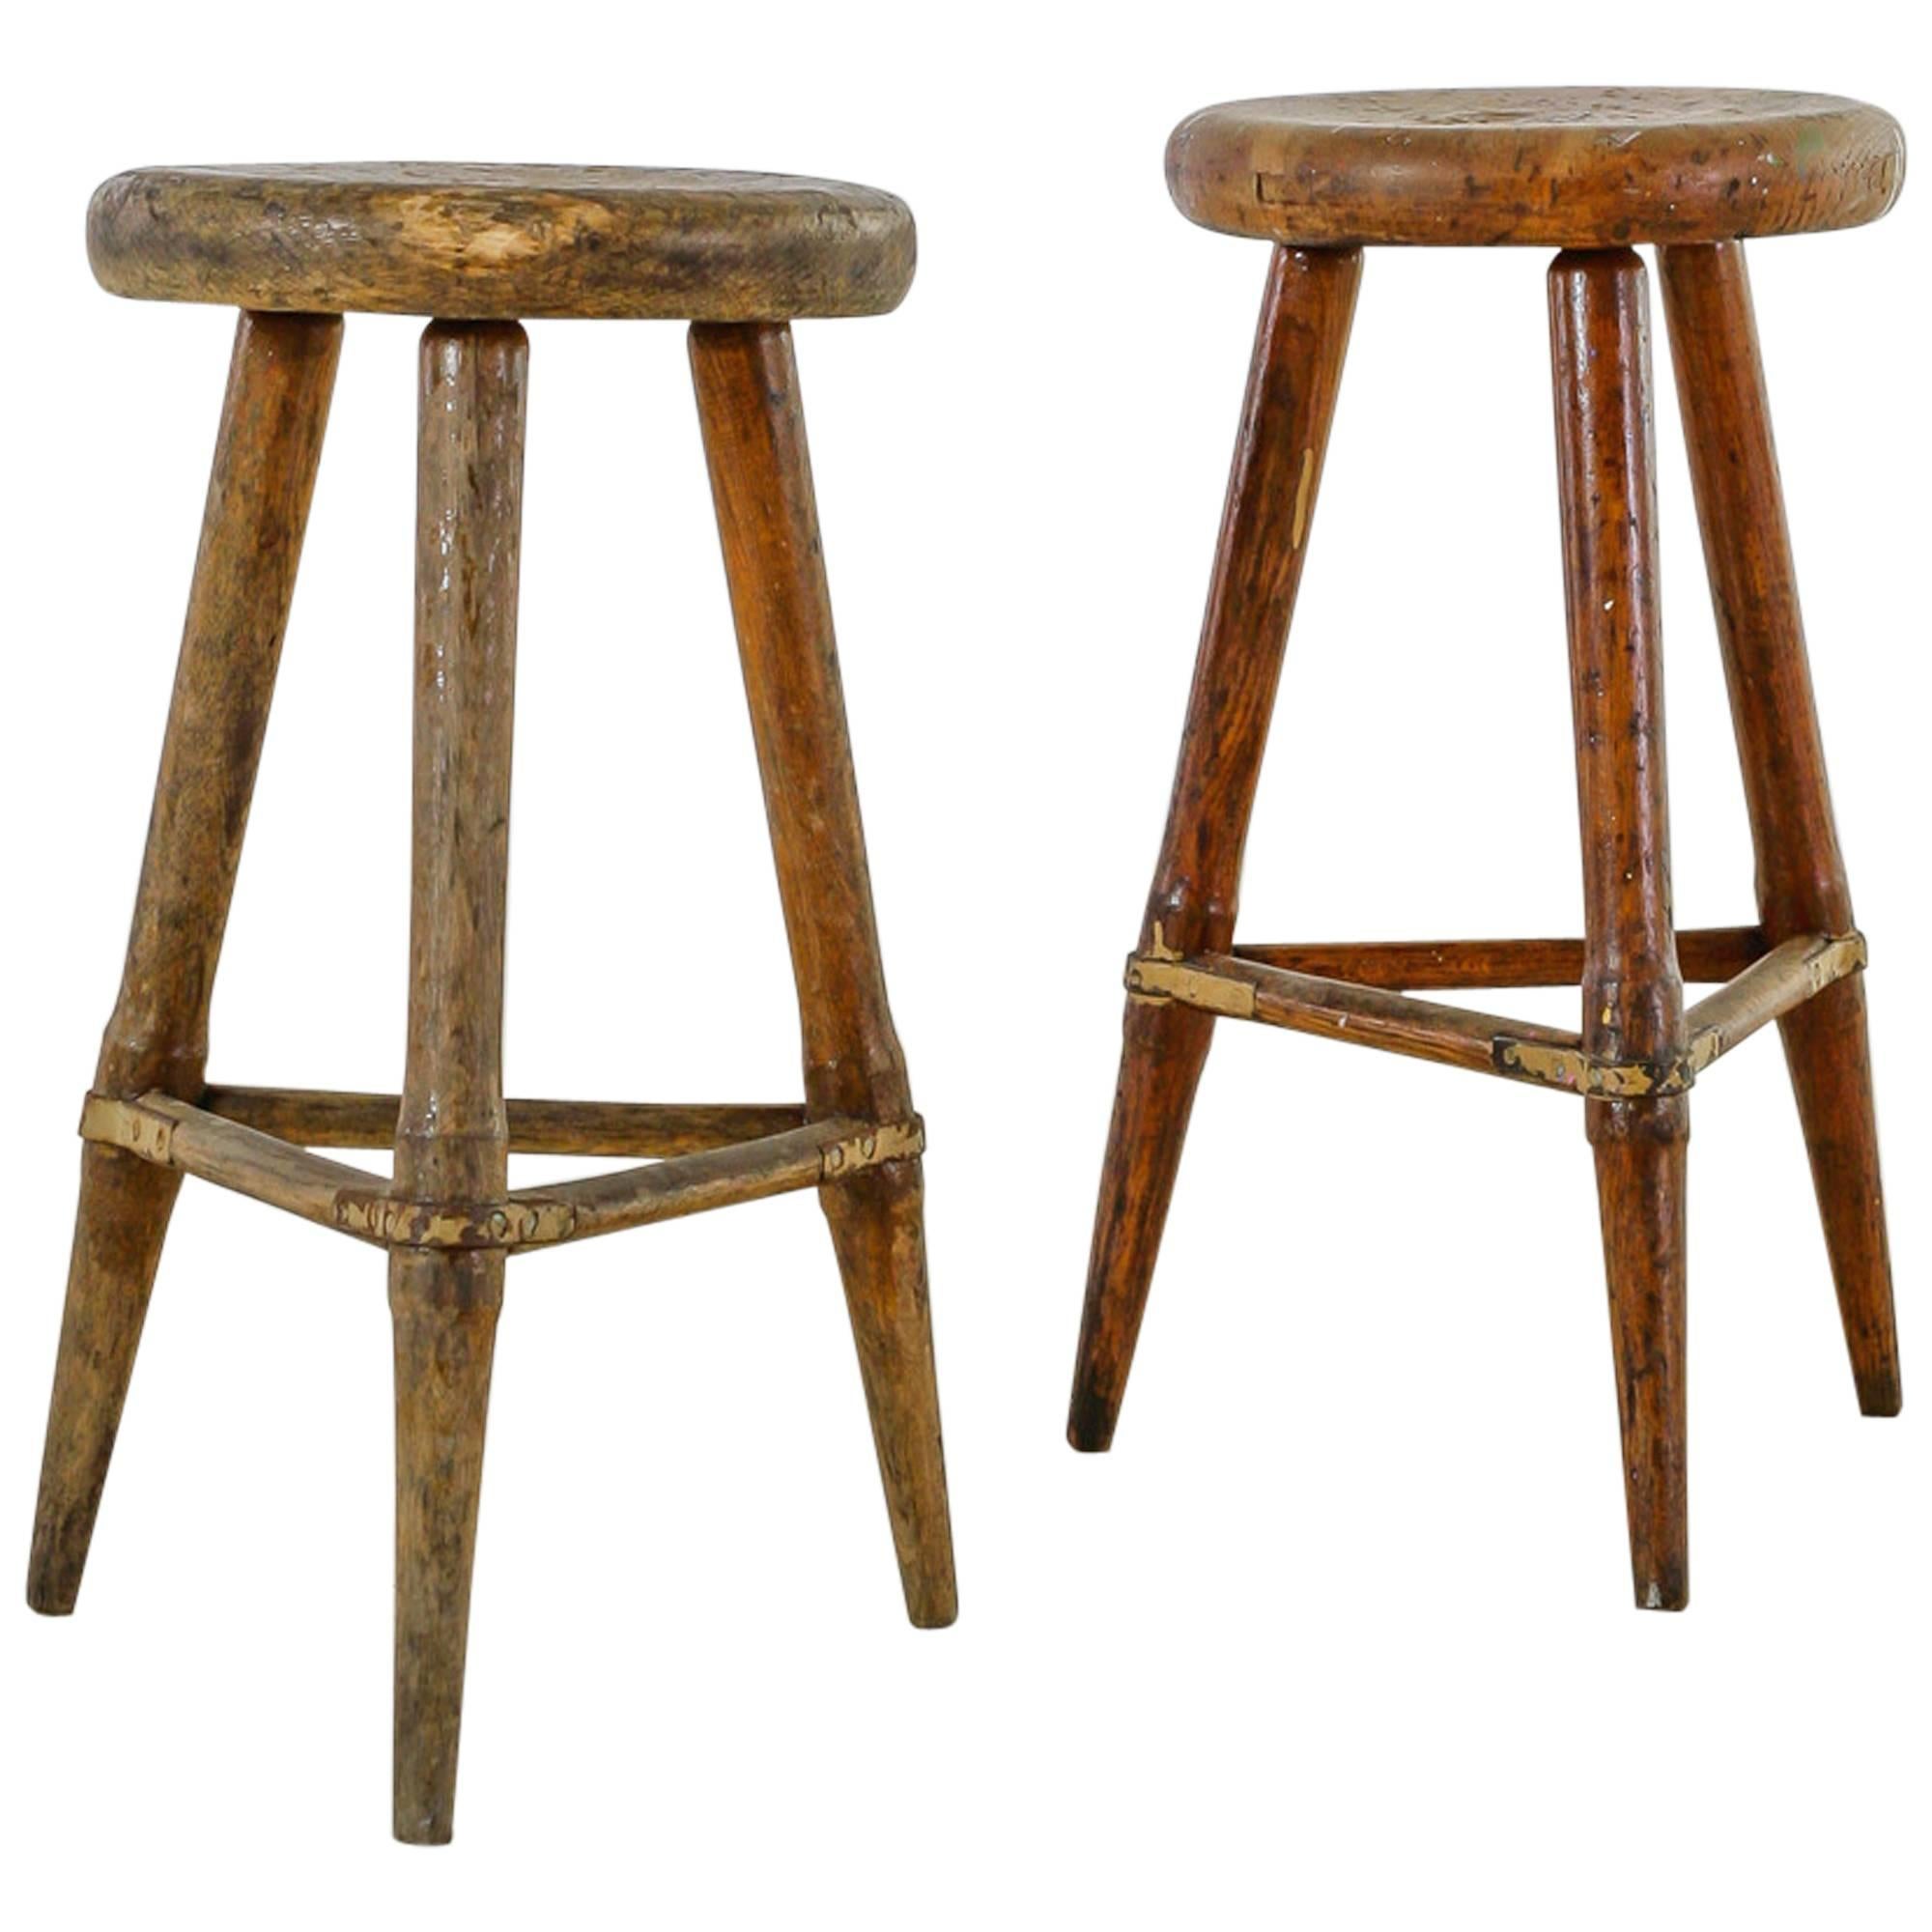 Pair of High Scandinavian Wooden Tripod Stools with Iron Connections, 1930s For Sale